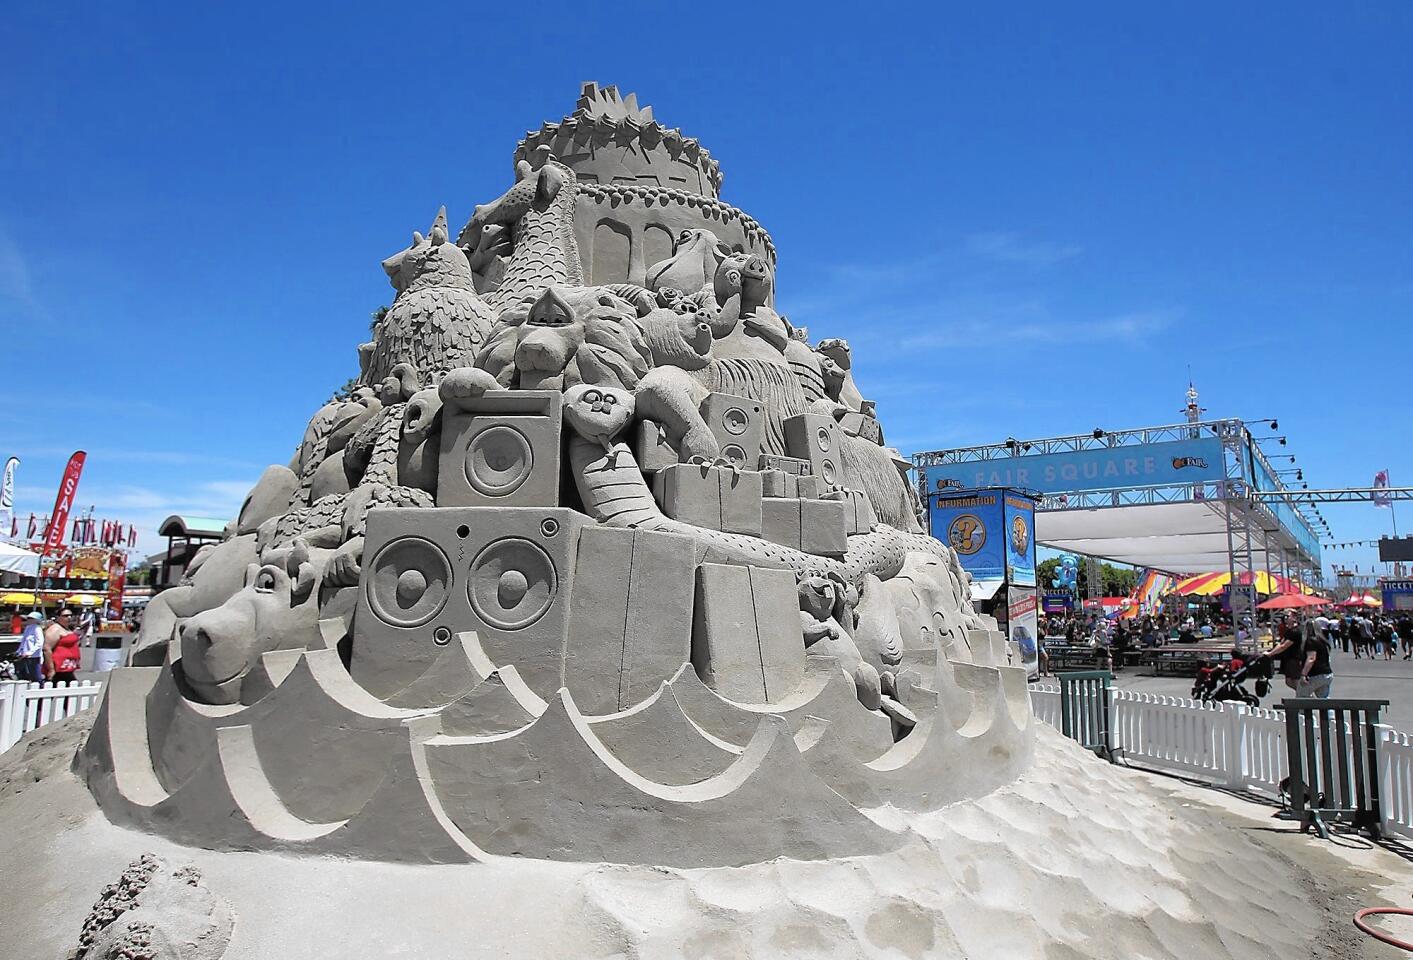 The Sandscapes "One Big Party" sand sculpture is nearly finished in the Fair Square area of the OC Fair on Wednesday.